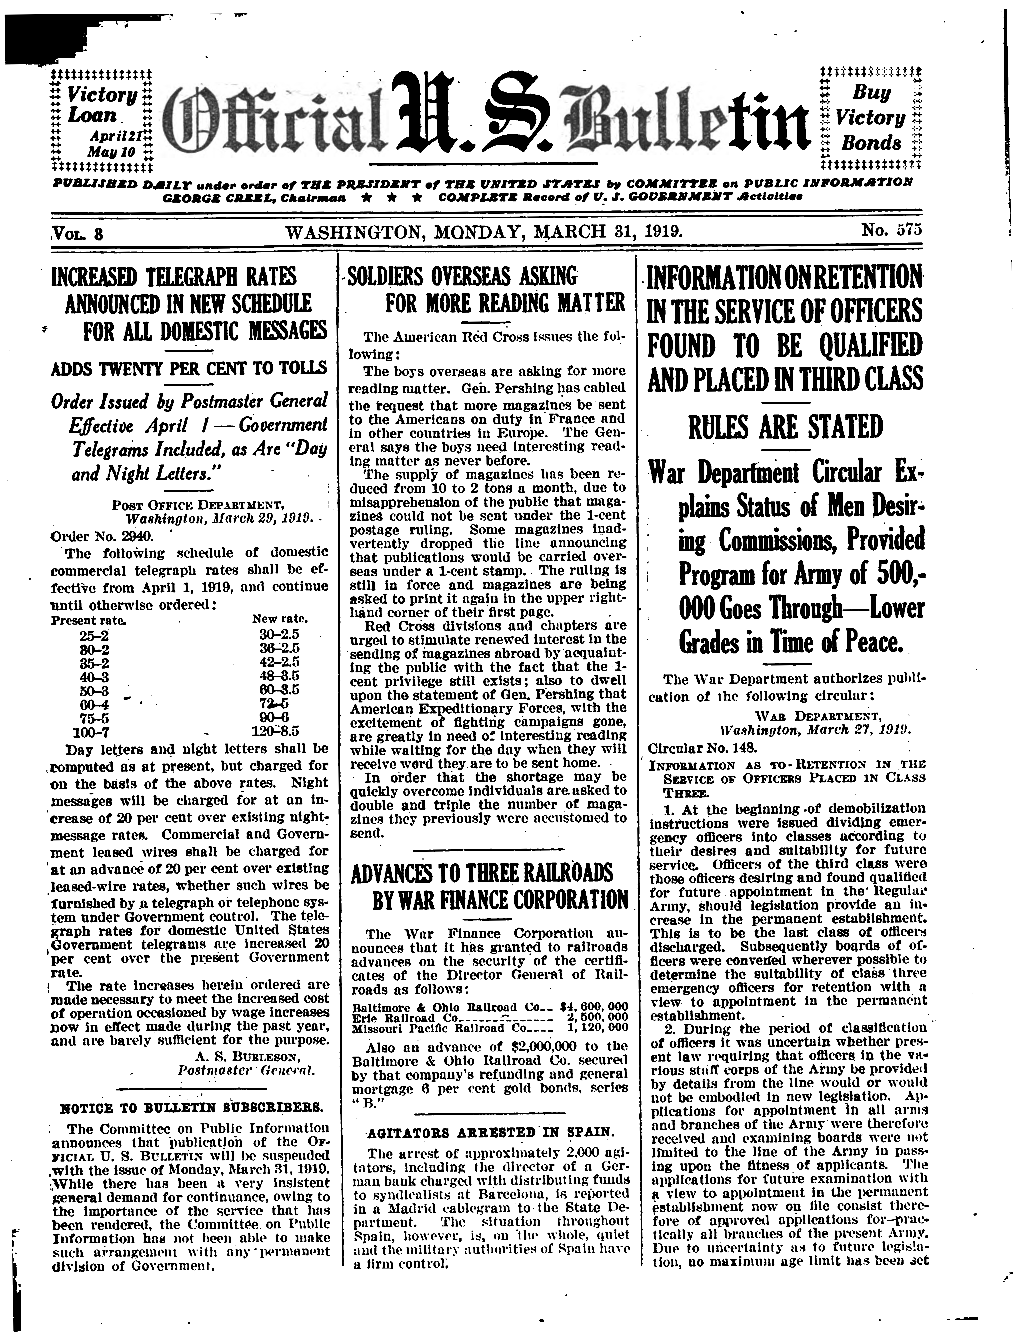 Official U. S. Bulletin: Monday, March 31, 1919